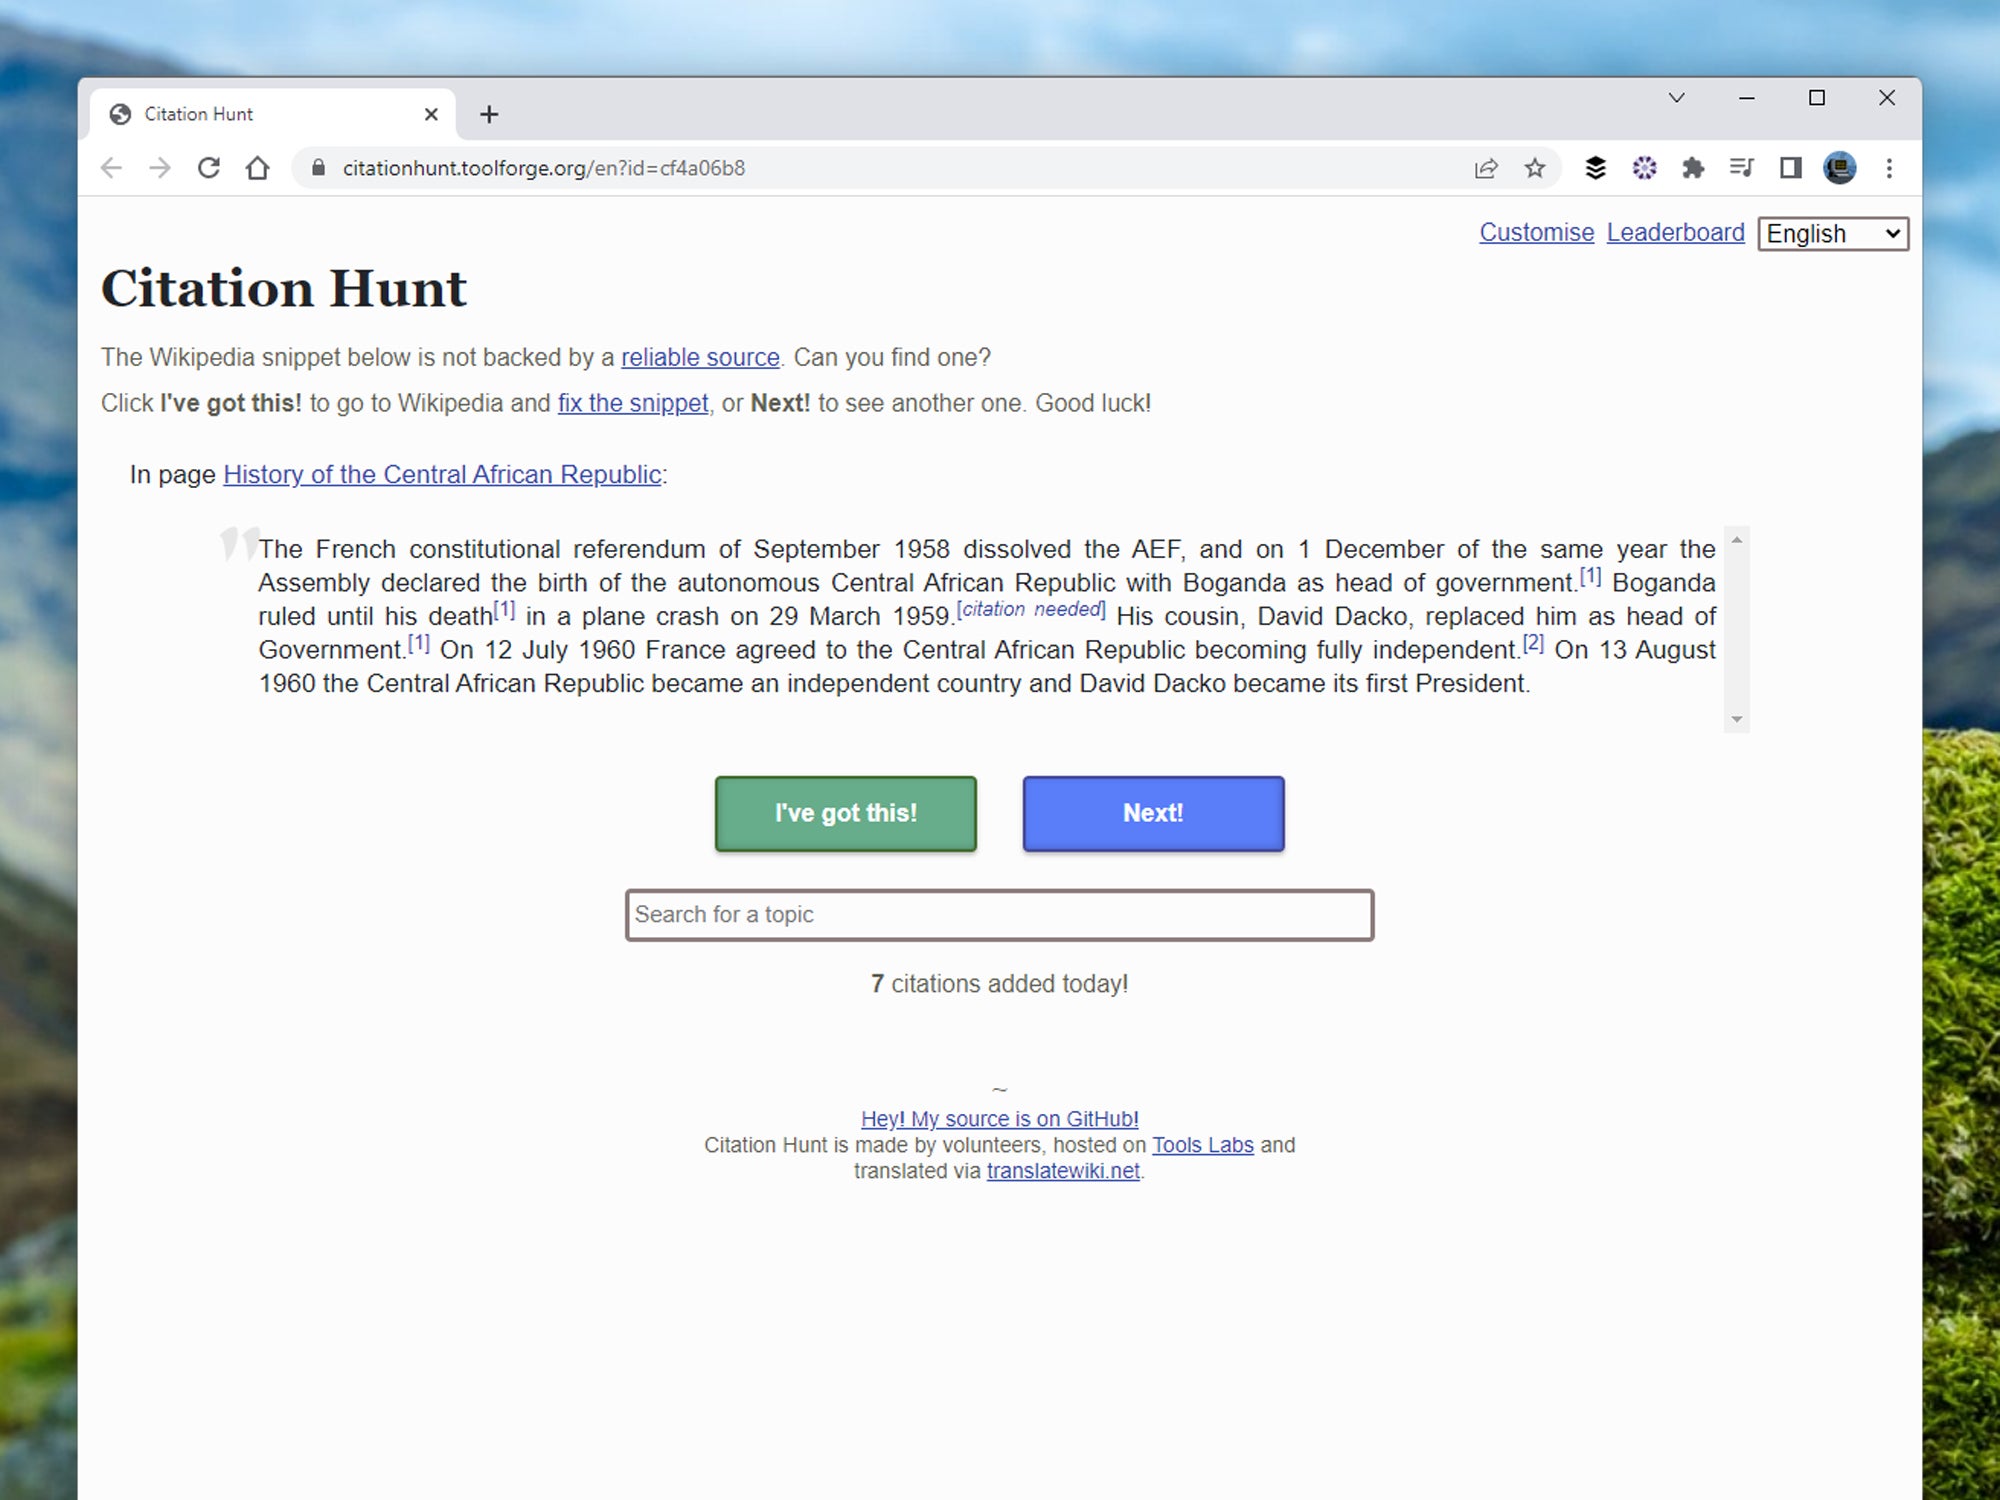 The Citation Hunt game on Wikipedia.